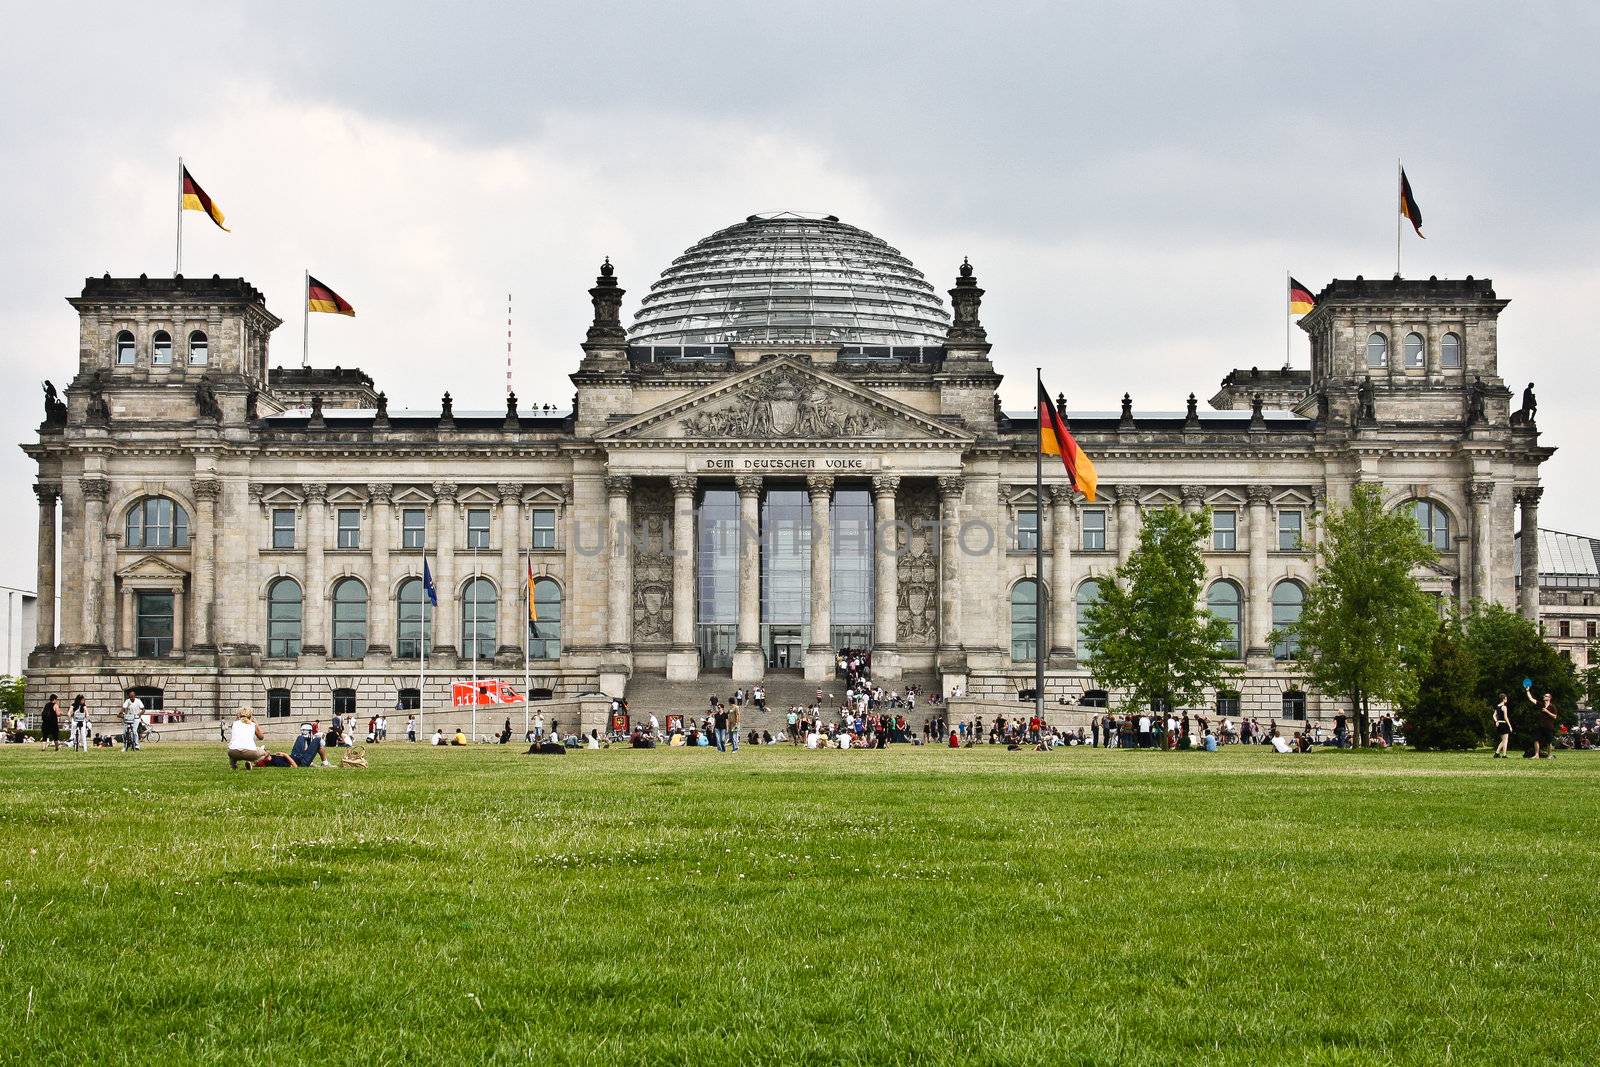 The Reichstag building from 1894 in Berlin, Germany by minoandriani